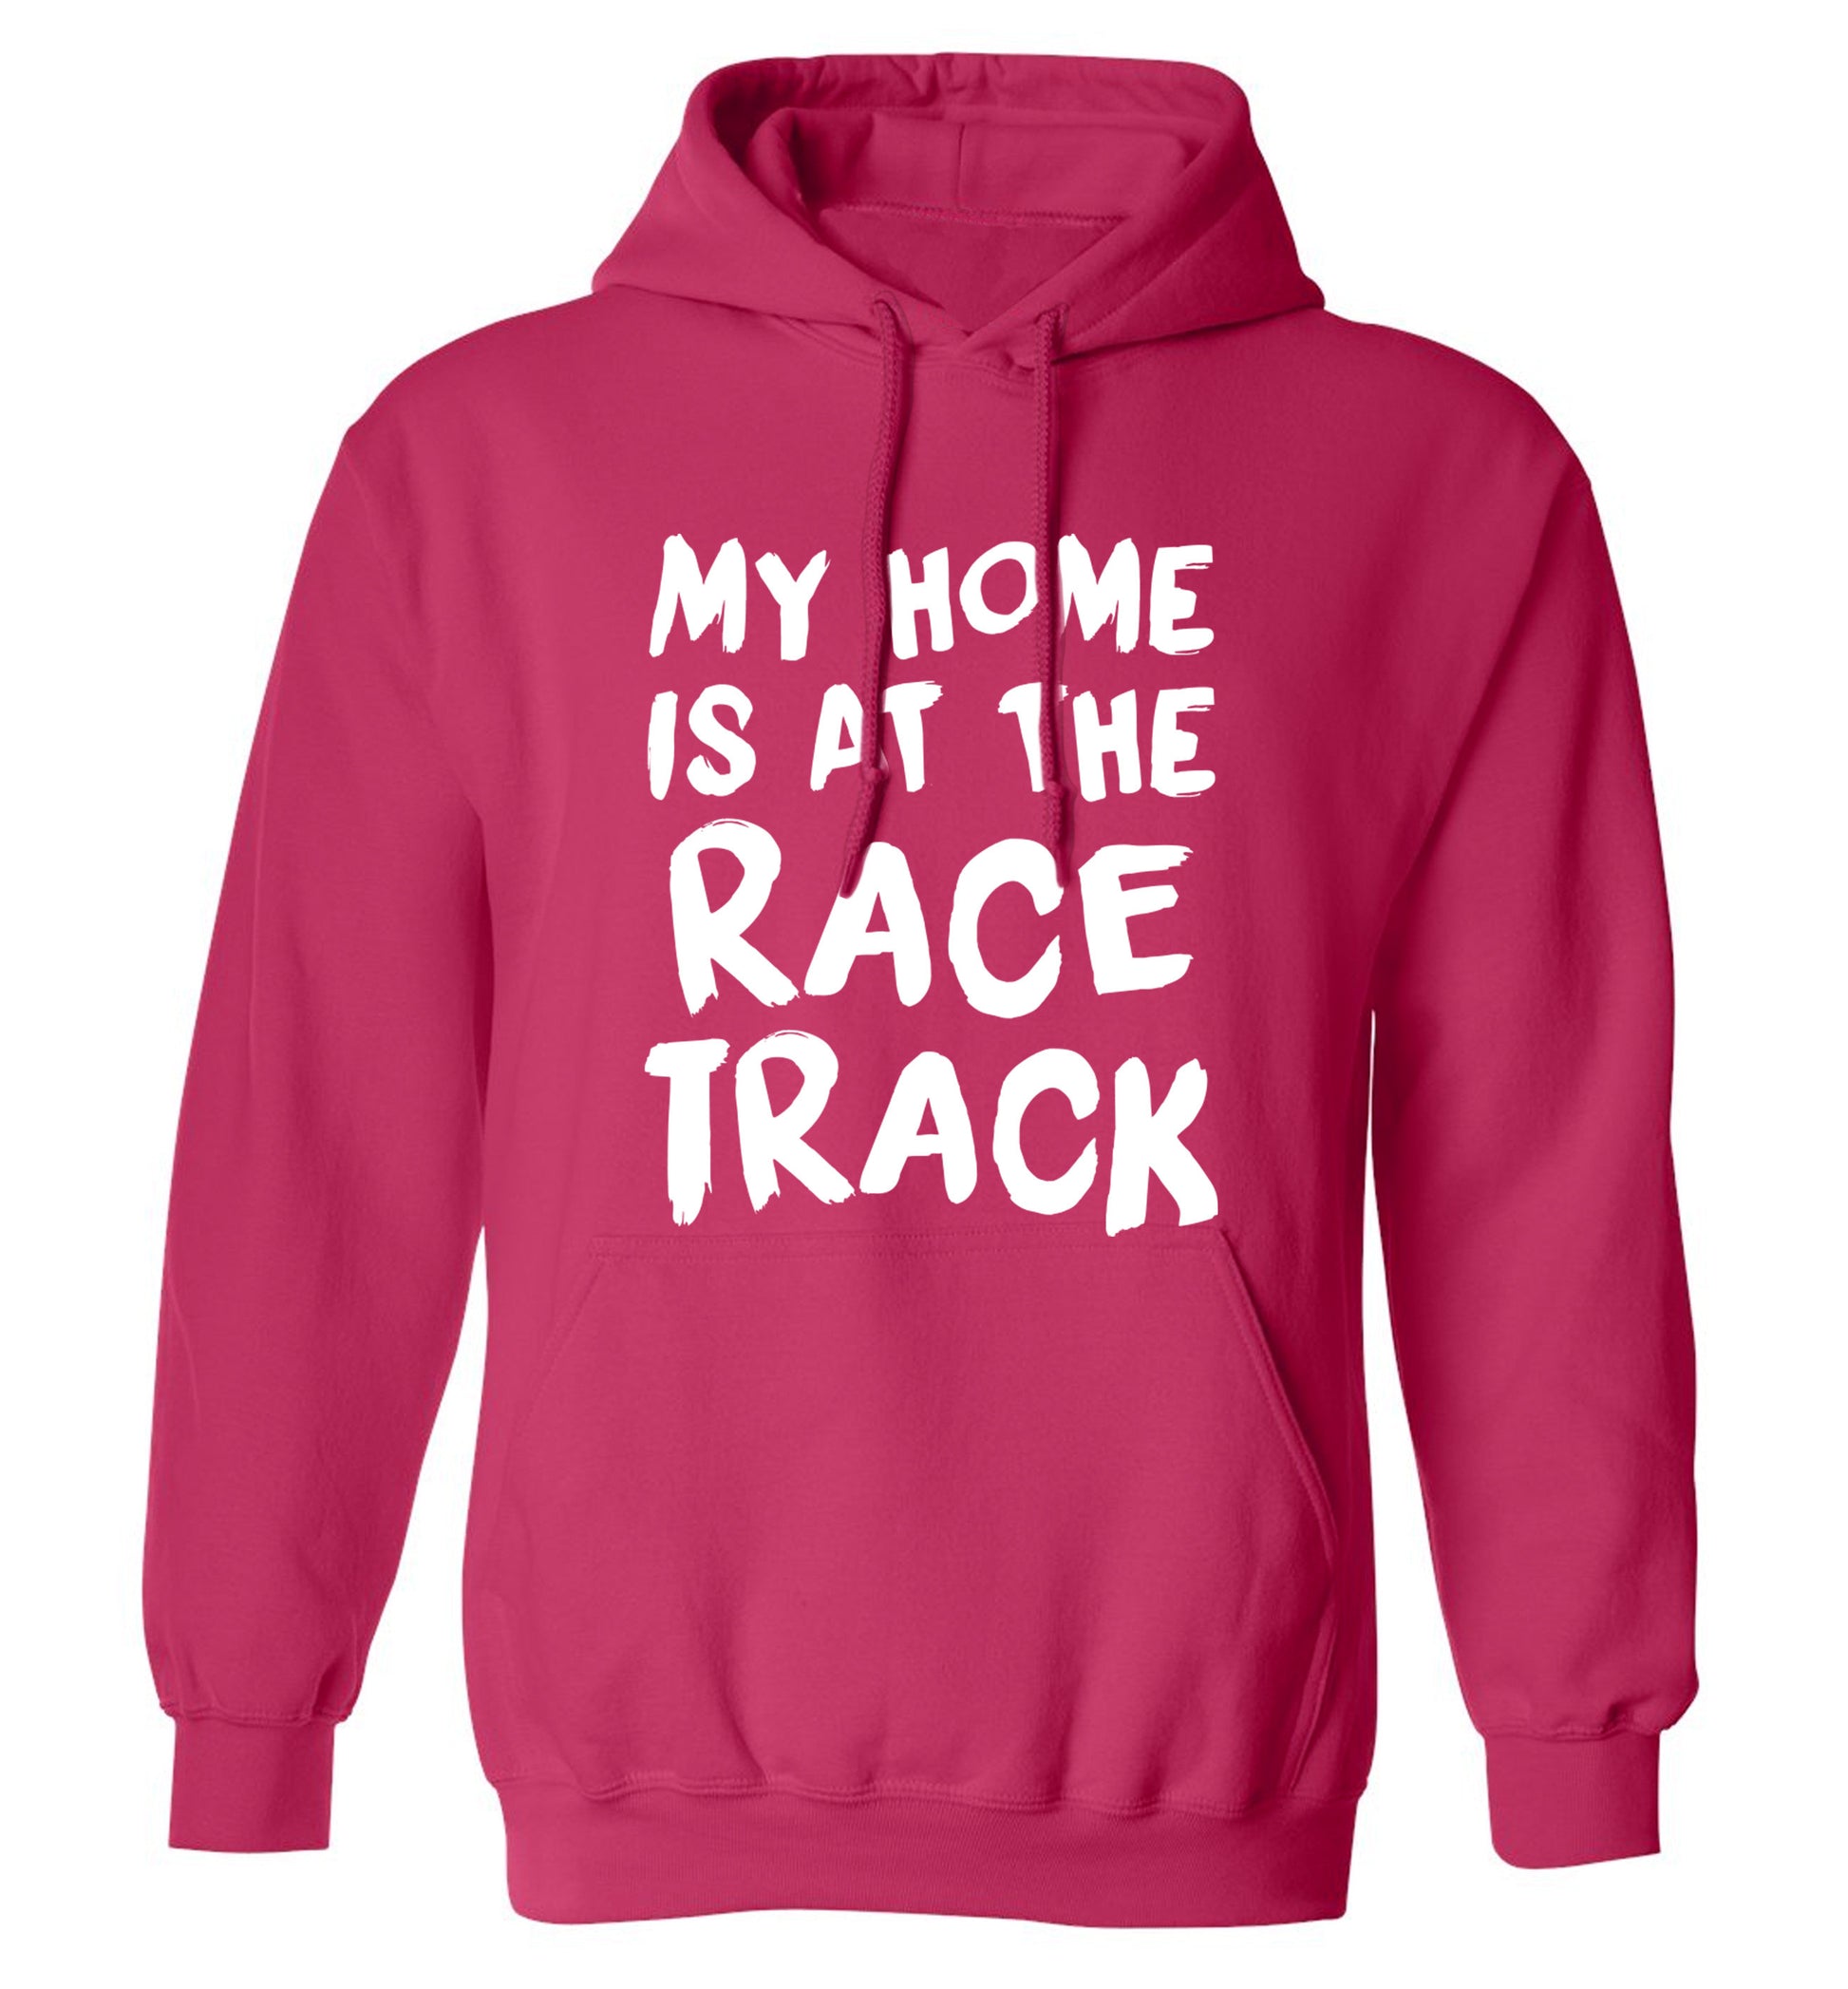 My home is at the race track adults unisex pink hoodie 2XL